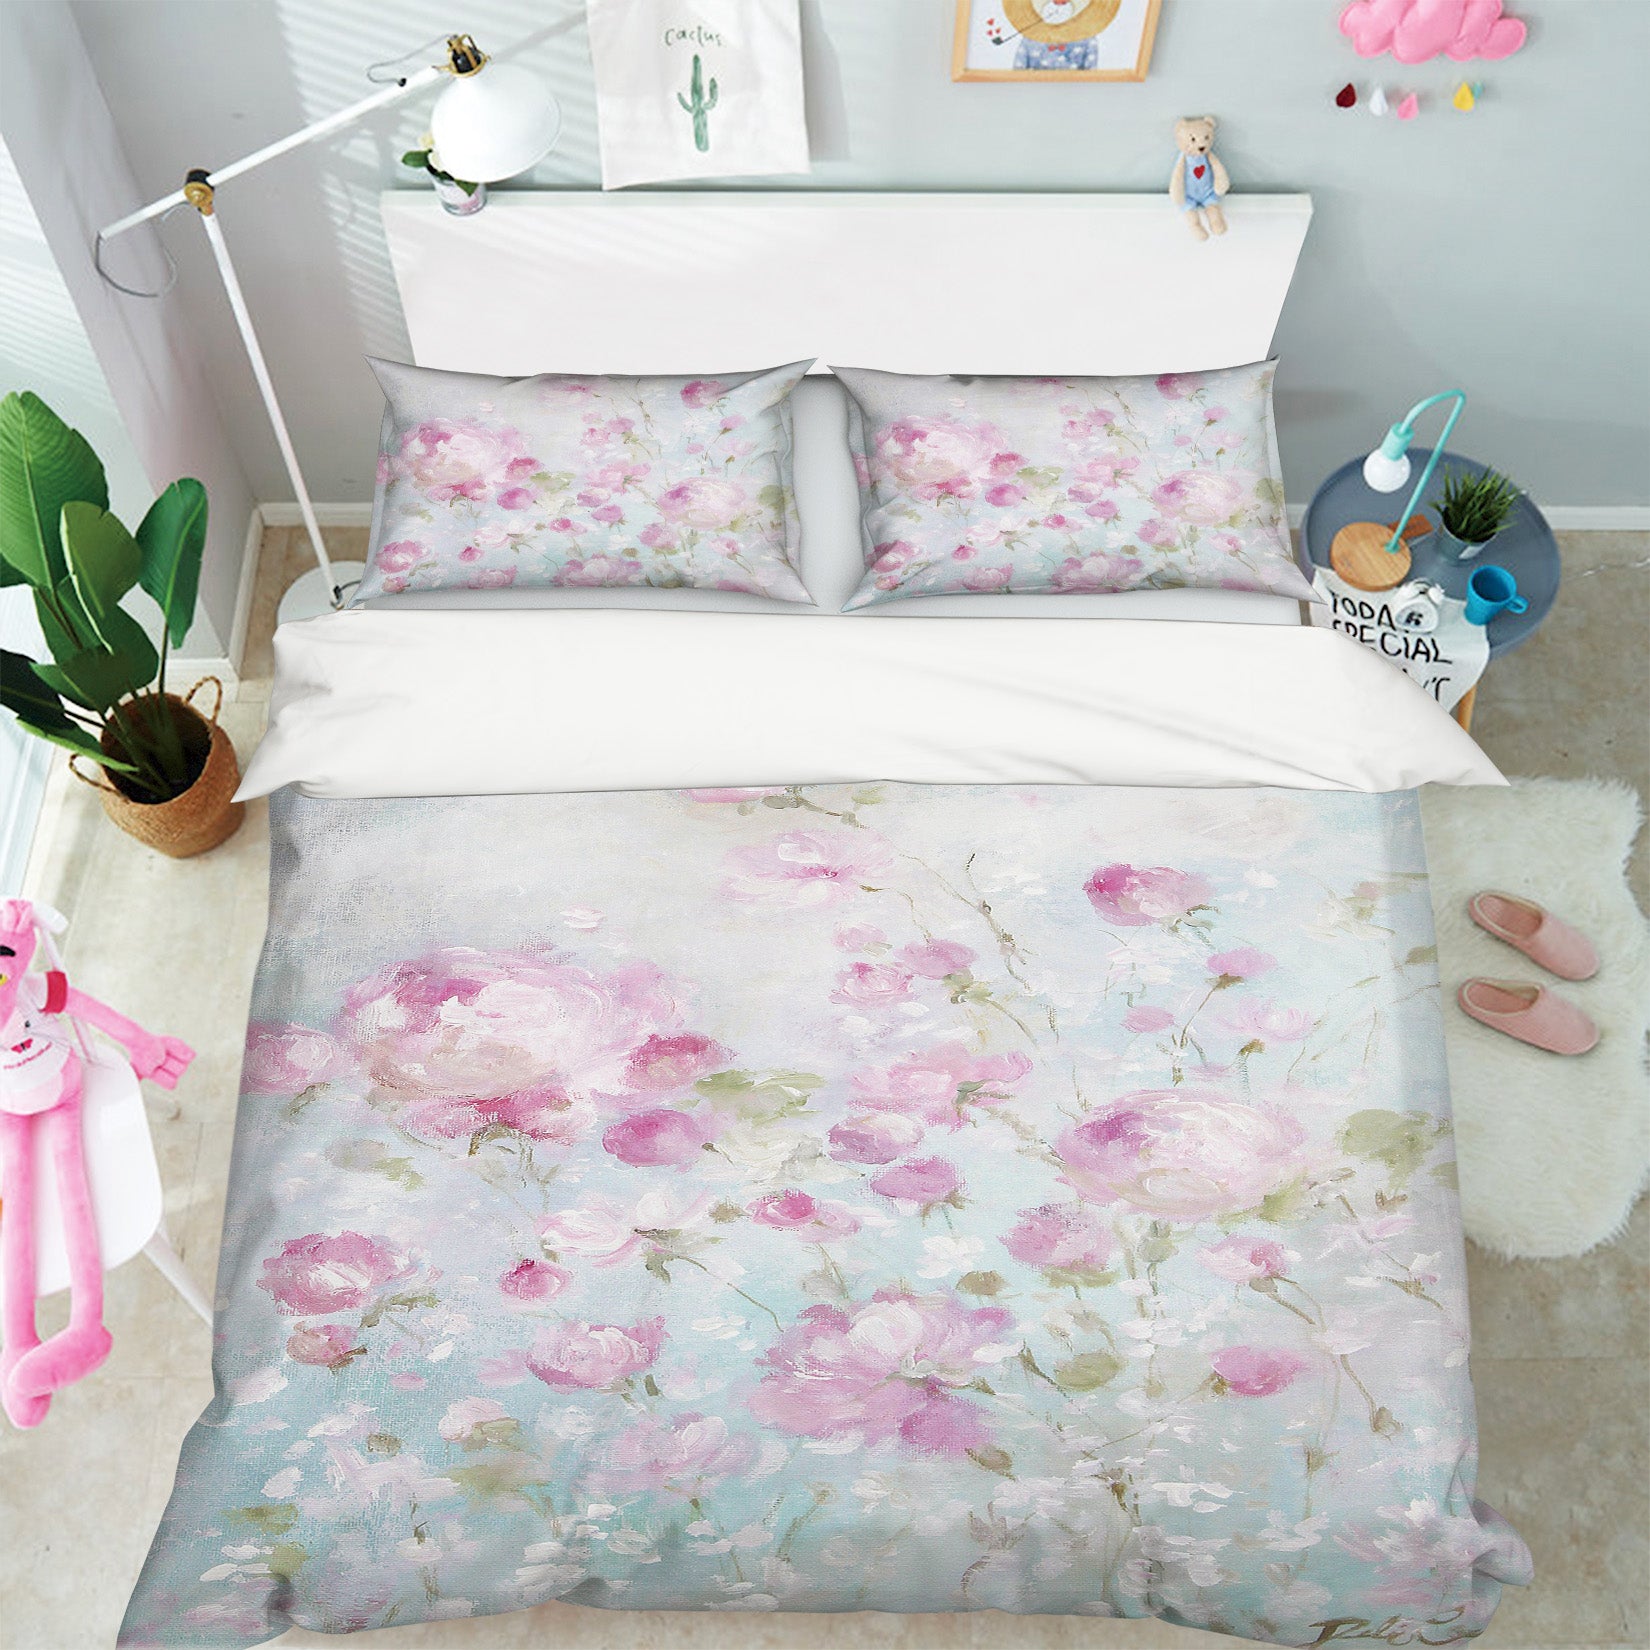 3D Pink Flower Clump 2059 Debi Coules Bedding Bed Pillowcases Quilt